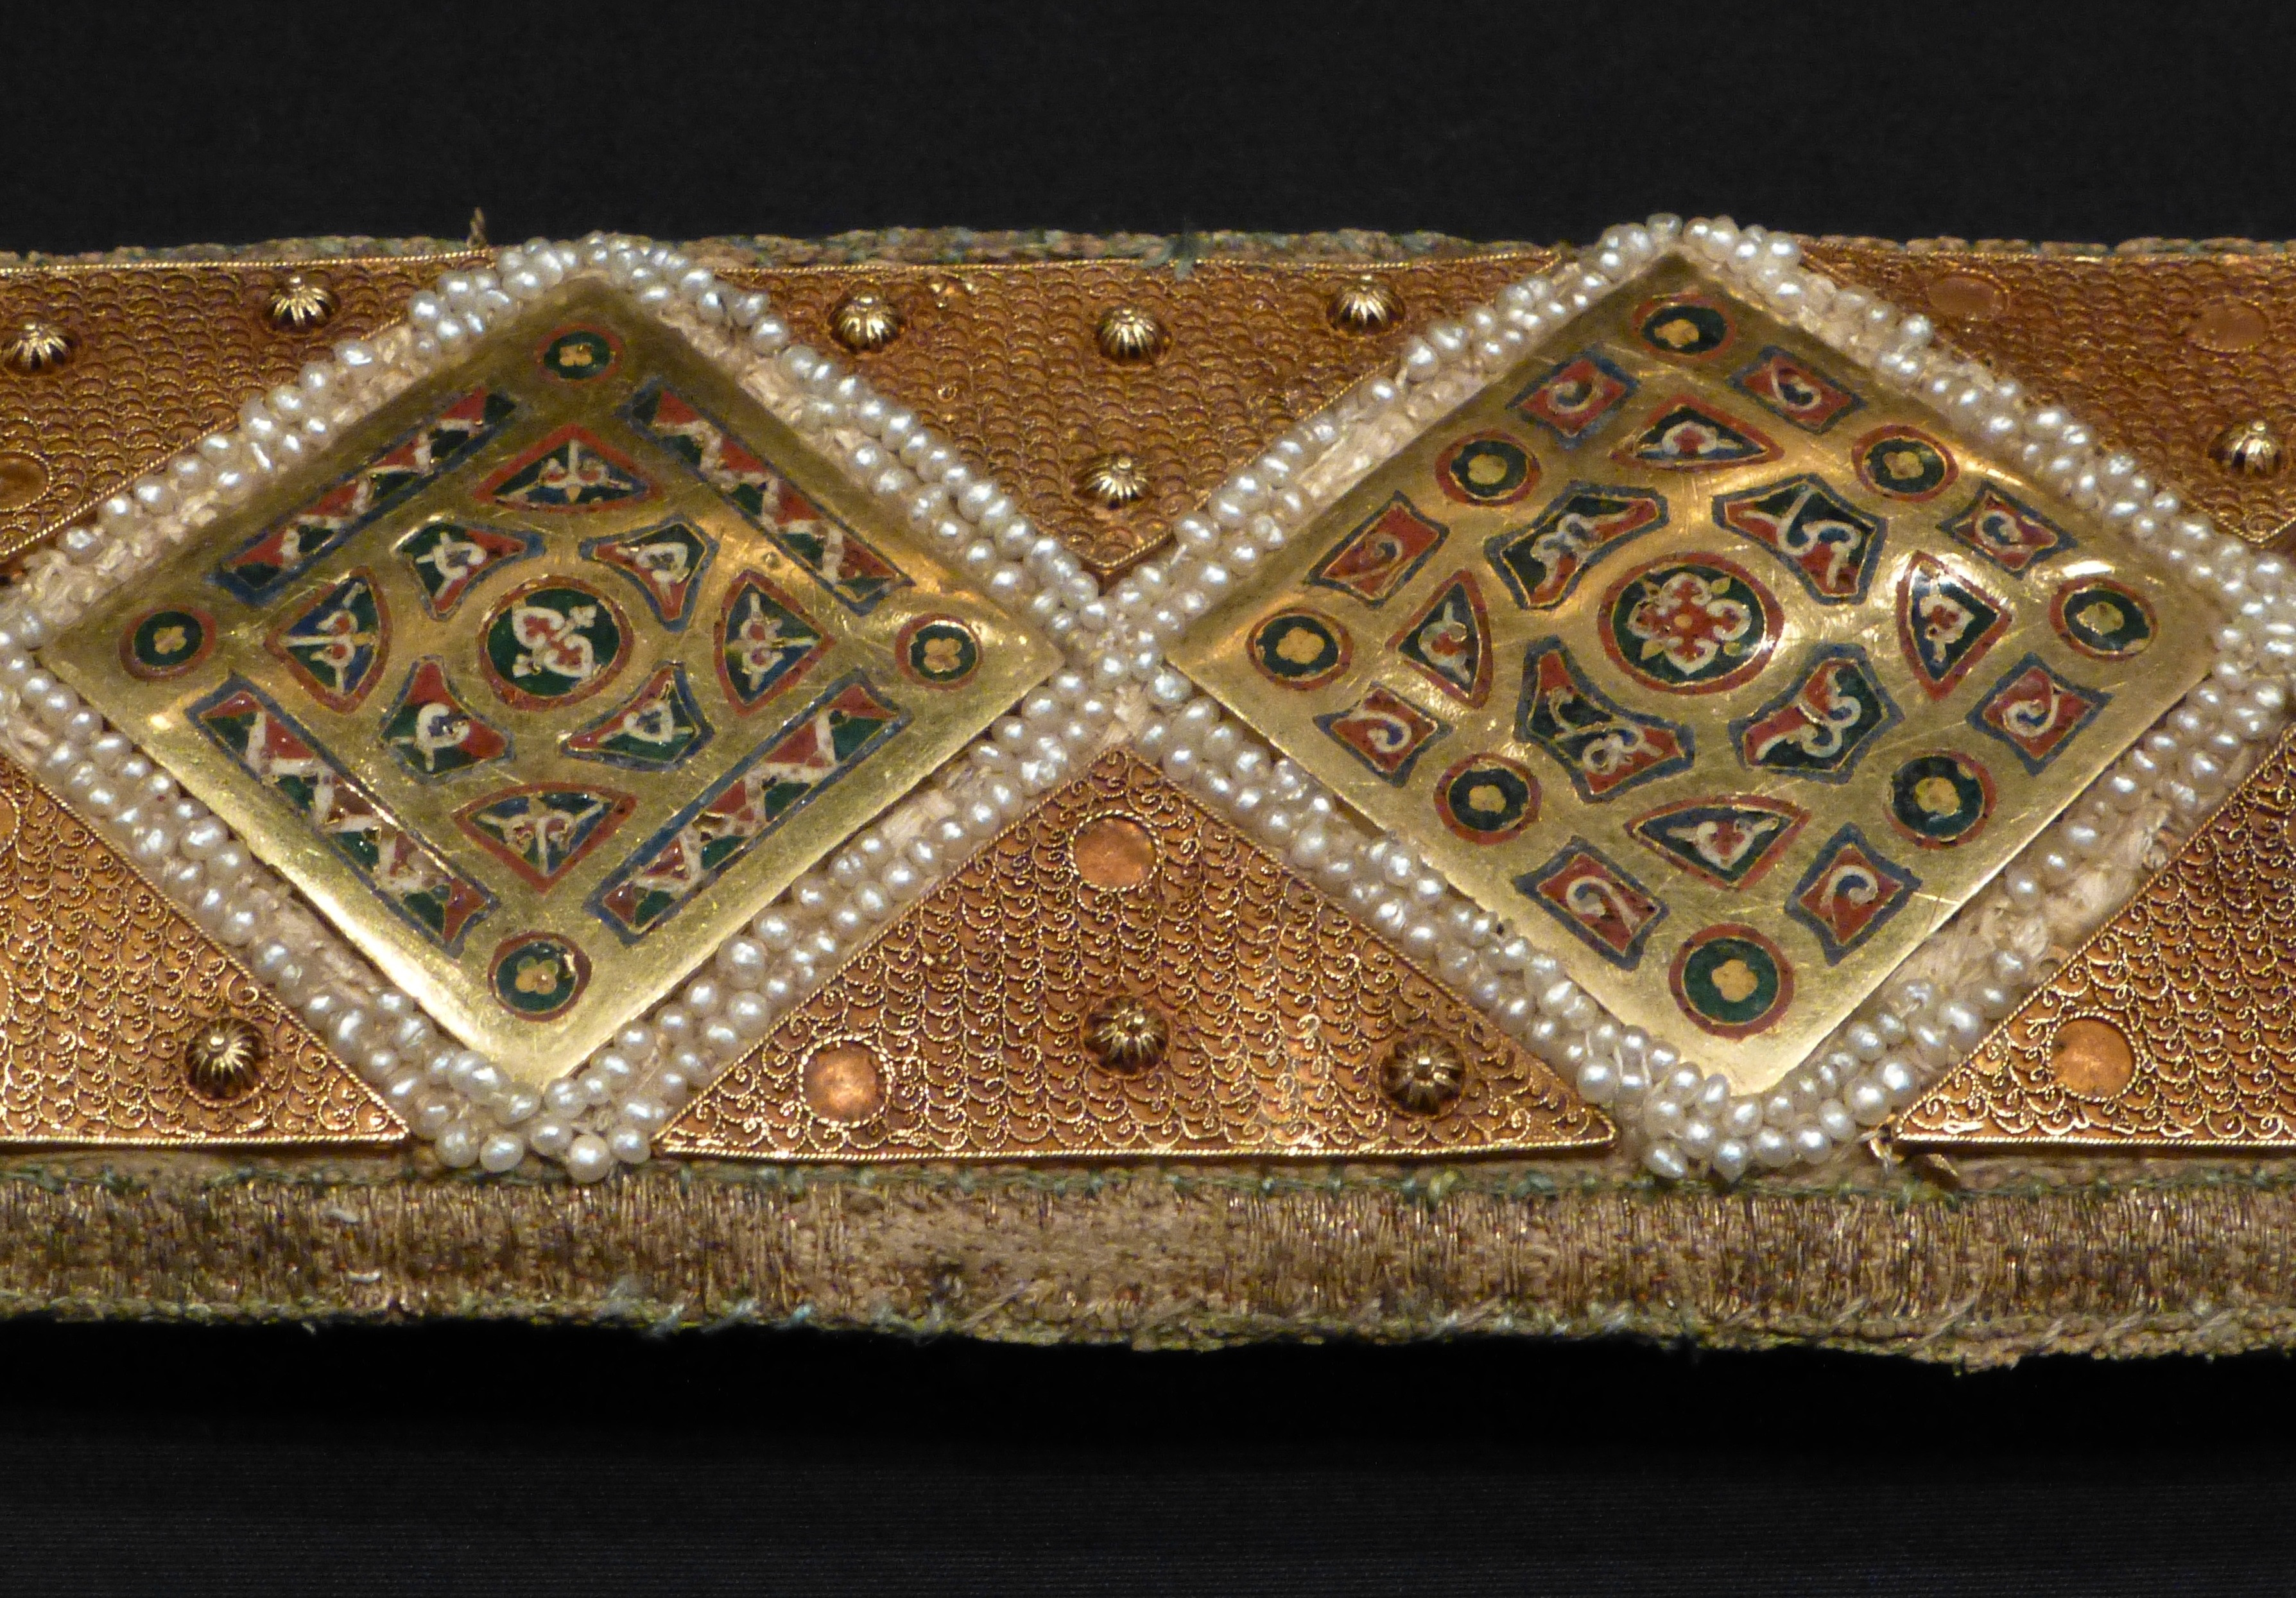 Scabbard of ceremonial sword of Emperor Frederick II, decorated with enamels, double rows of pearls and vermiculuar filigree.